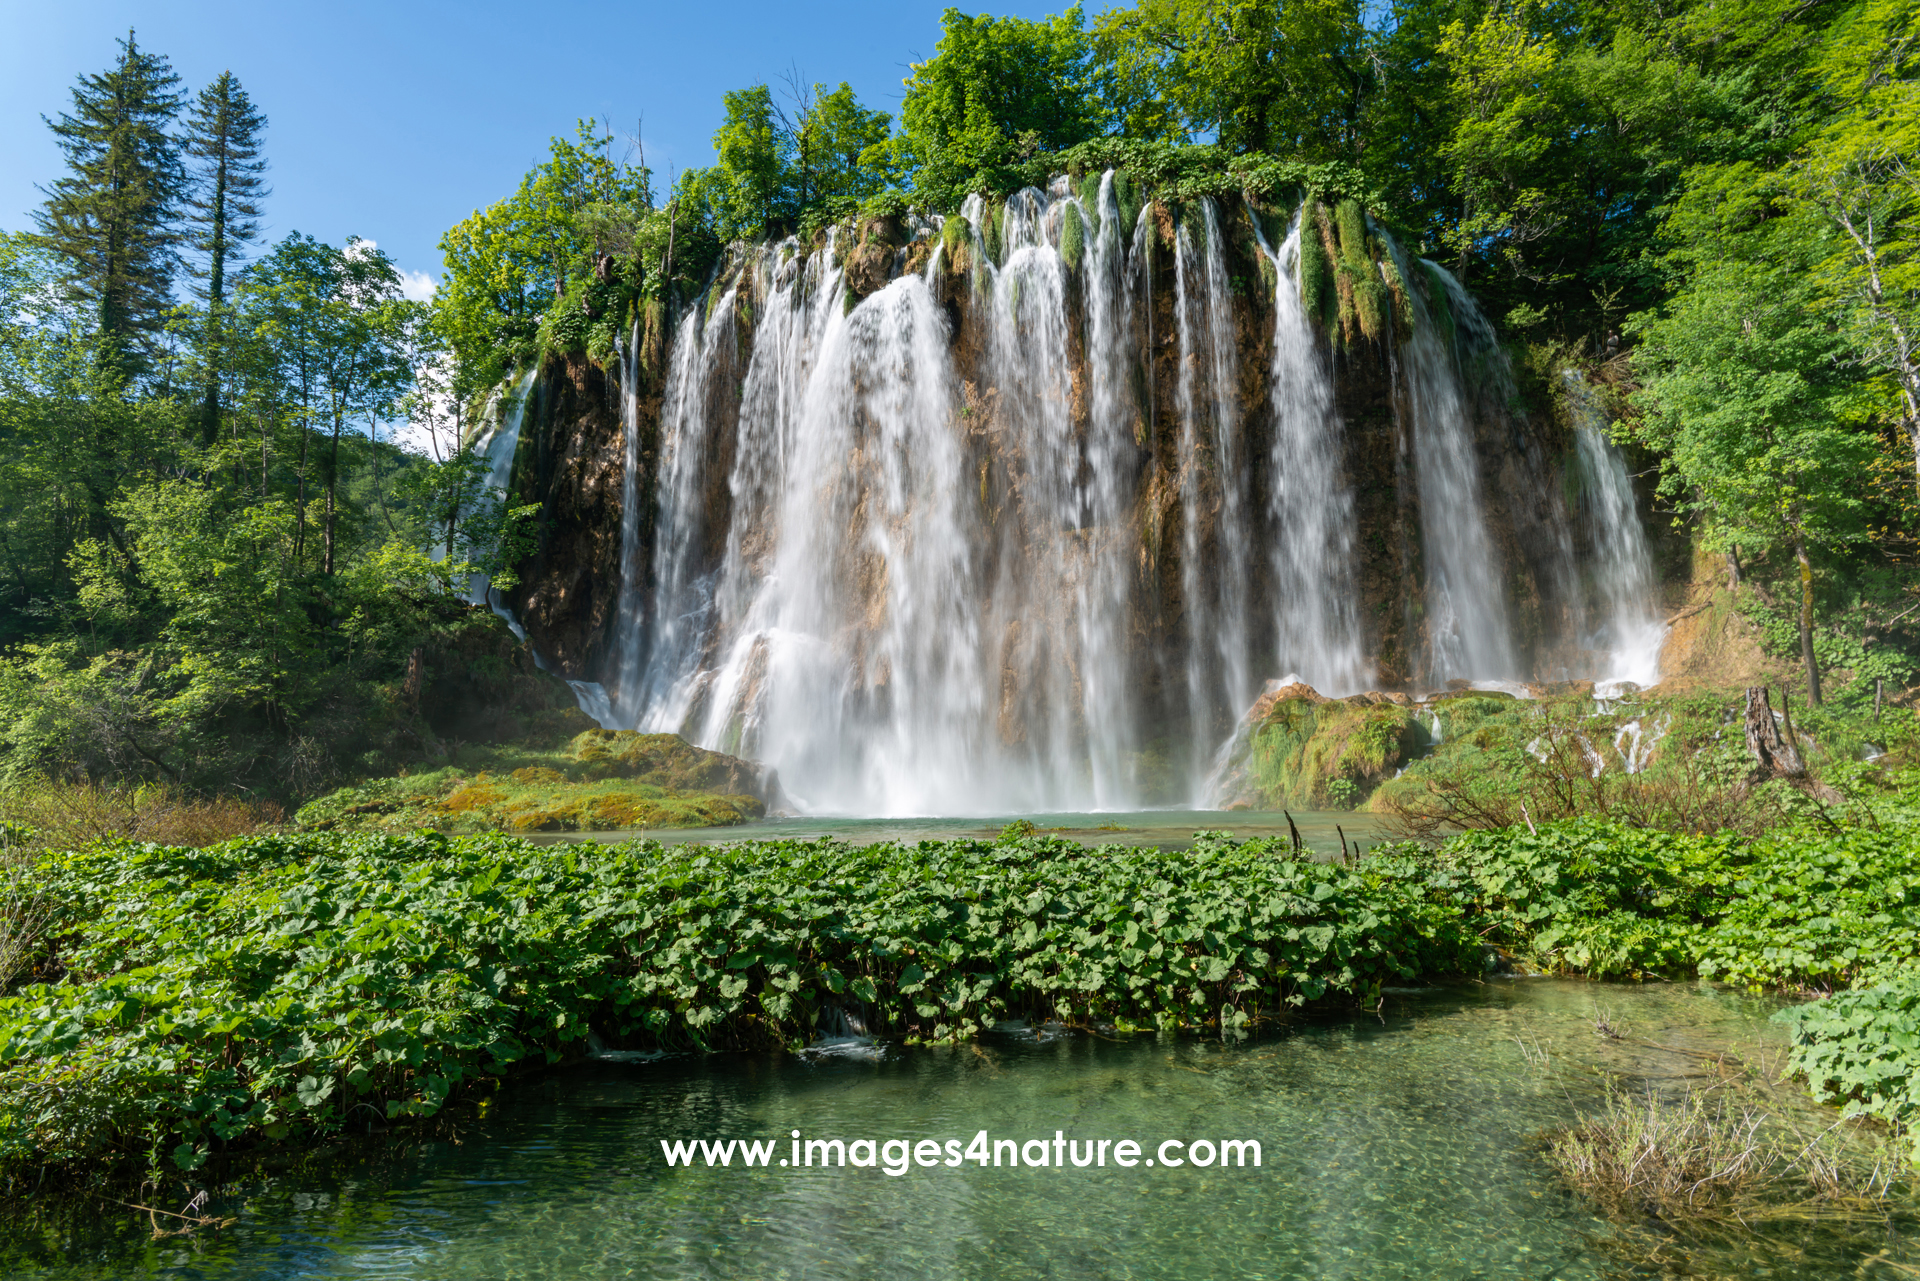 One of the impressive forest waterfalls at Plitvice upper lakes